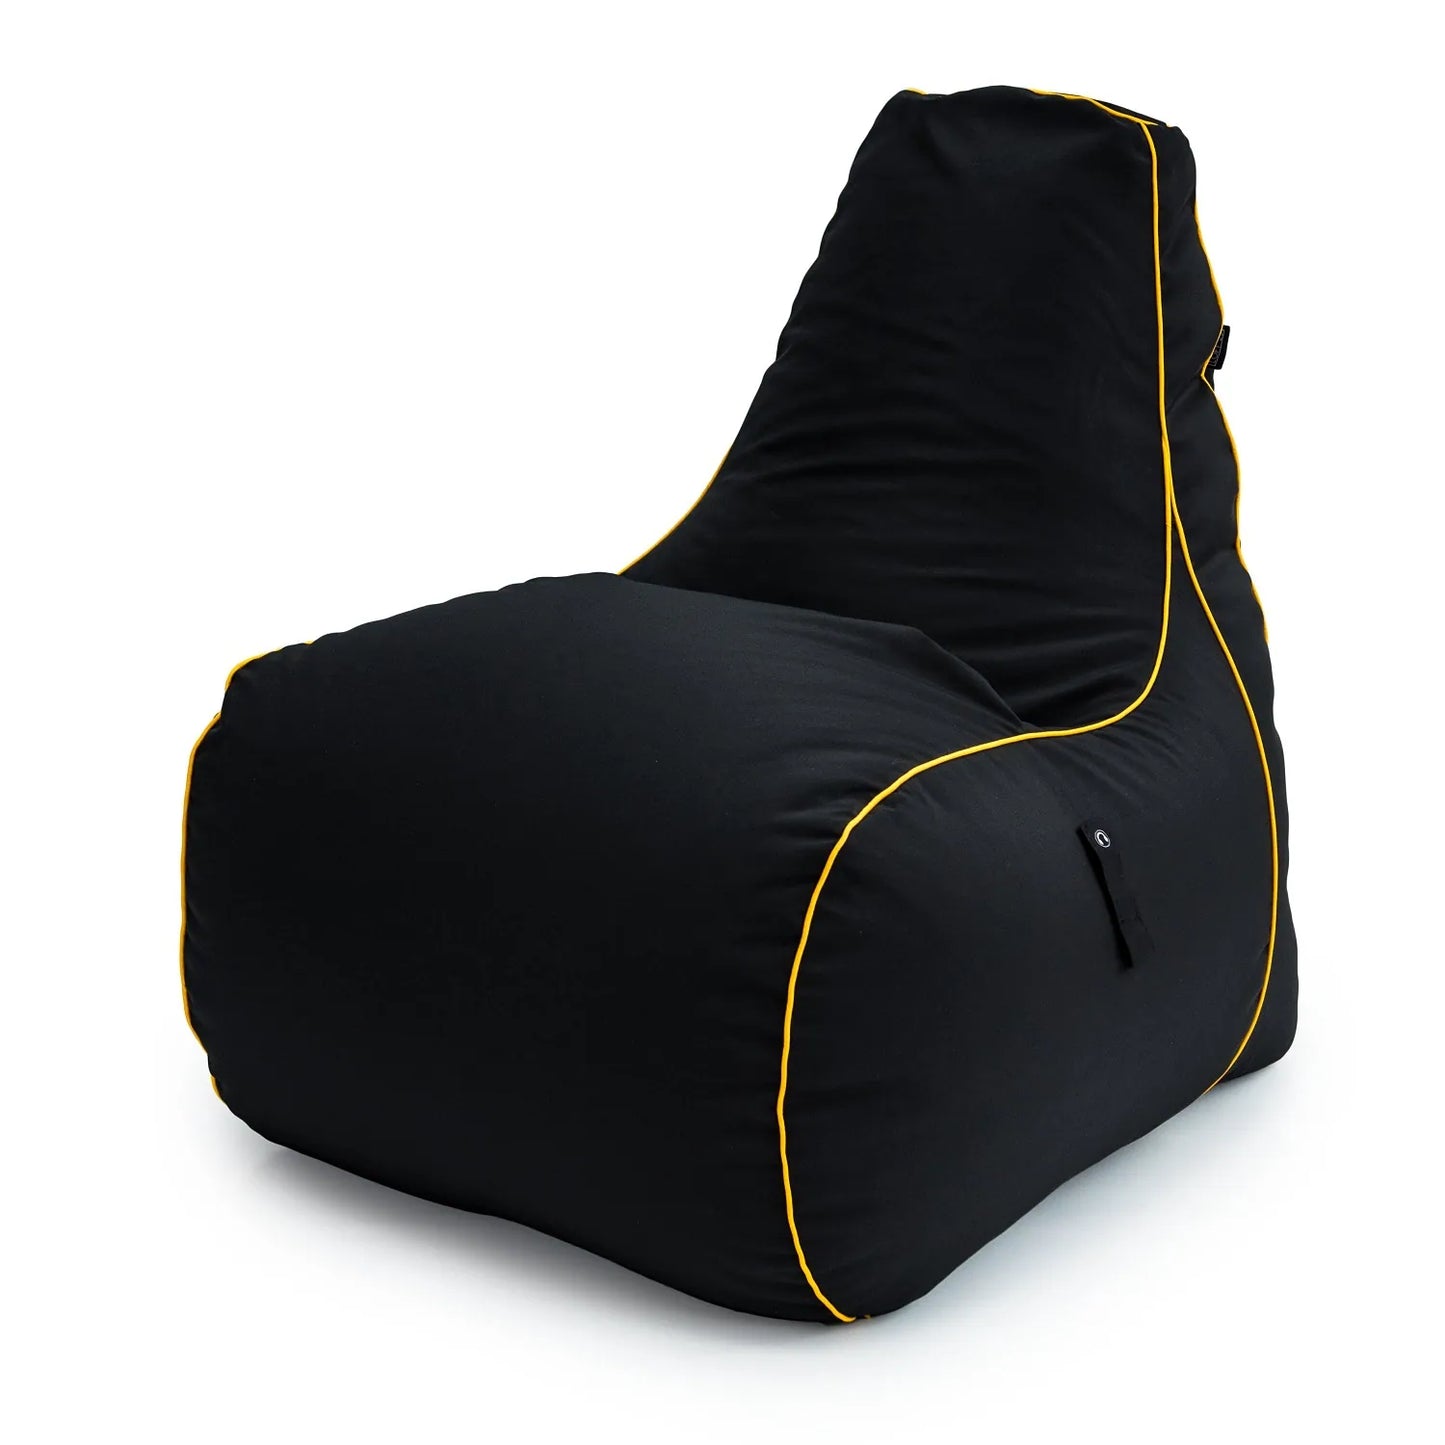 A black bean bag cover with yellow trim.